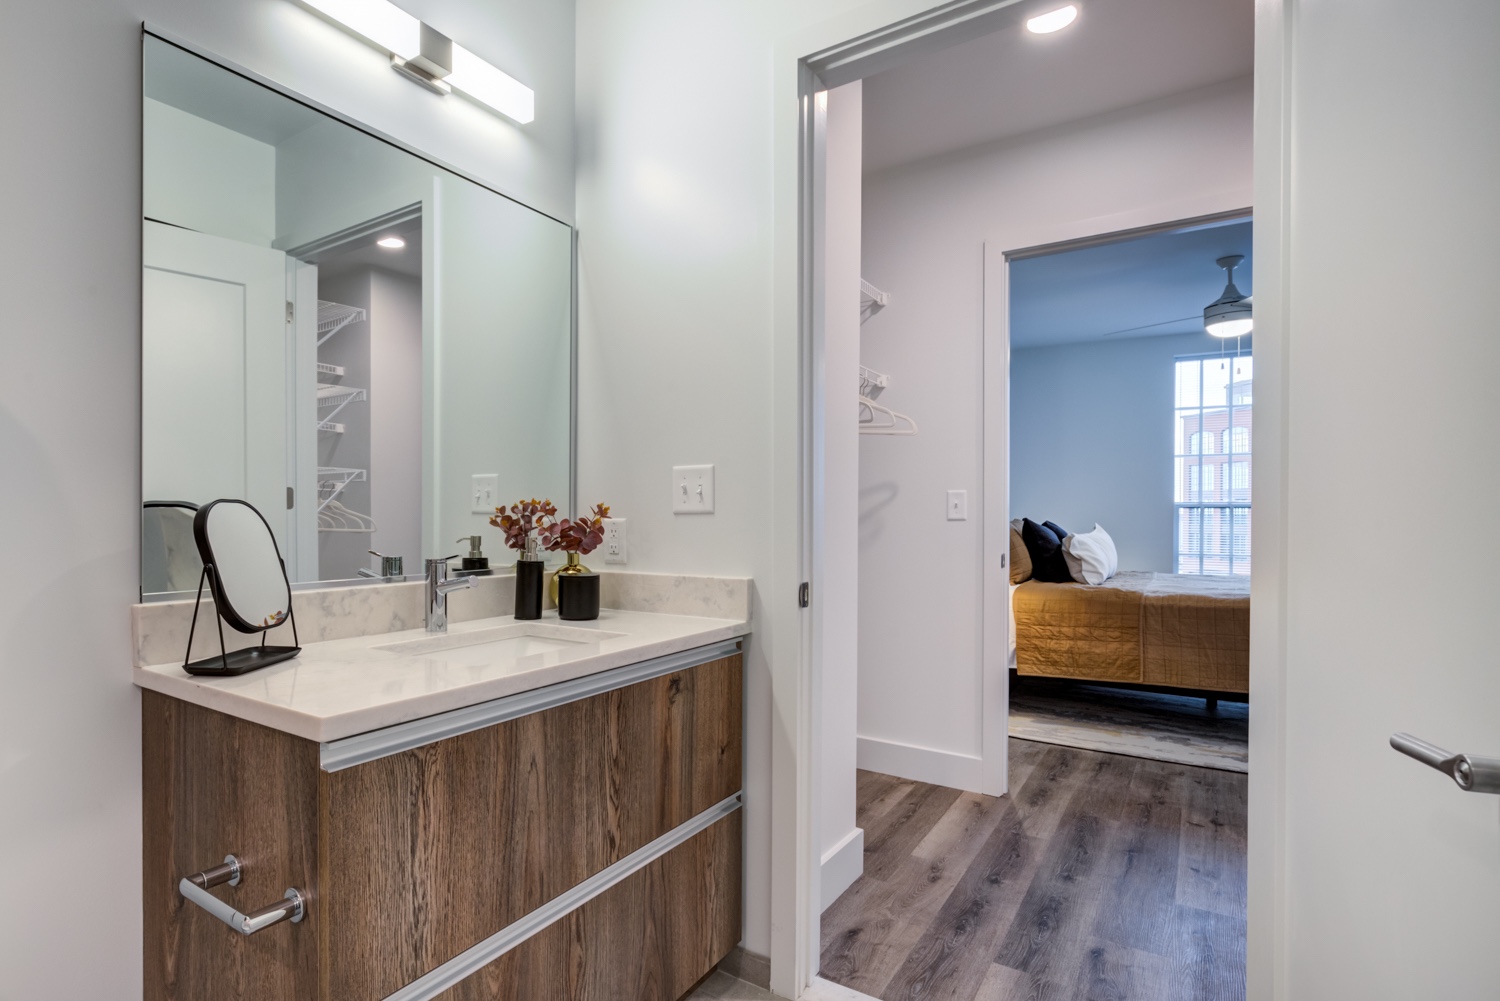 A bathroom with a sink and mirror. Bedroom in the background. Inside our luxury apartments at 250 Mission.